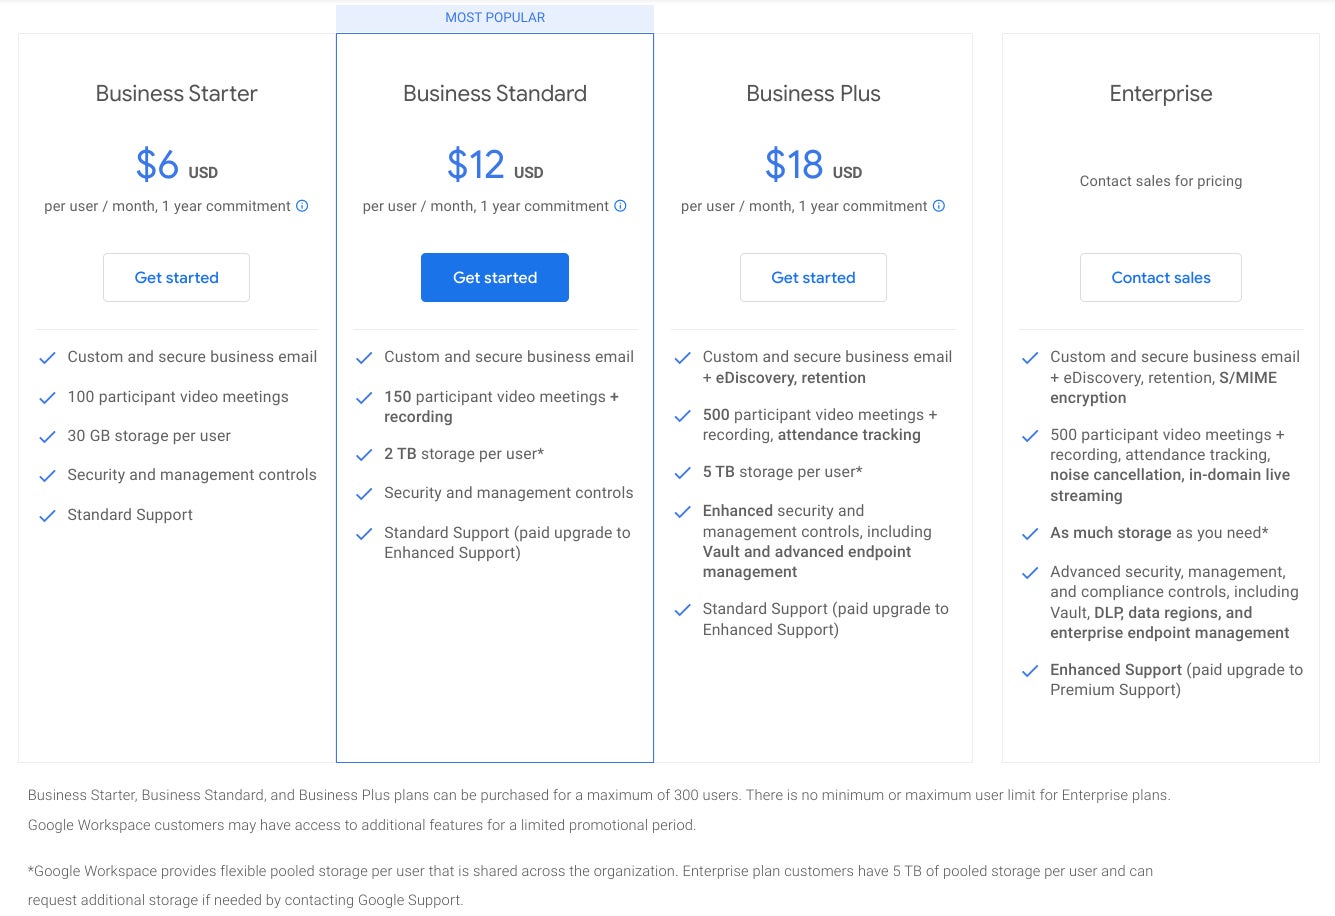 Google Workspace's pricing plans for Business Starter, Business Standard, Business Plus, and Enterprise